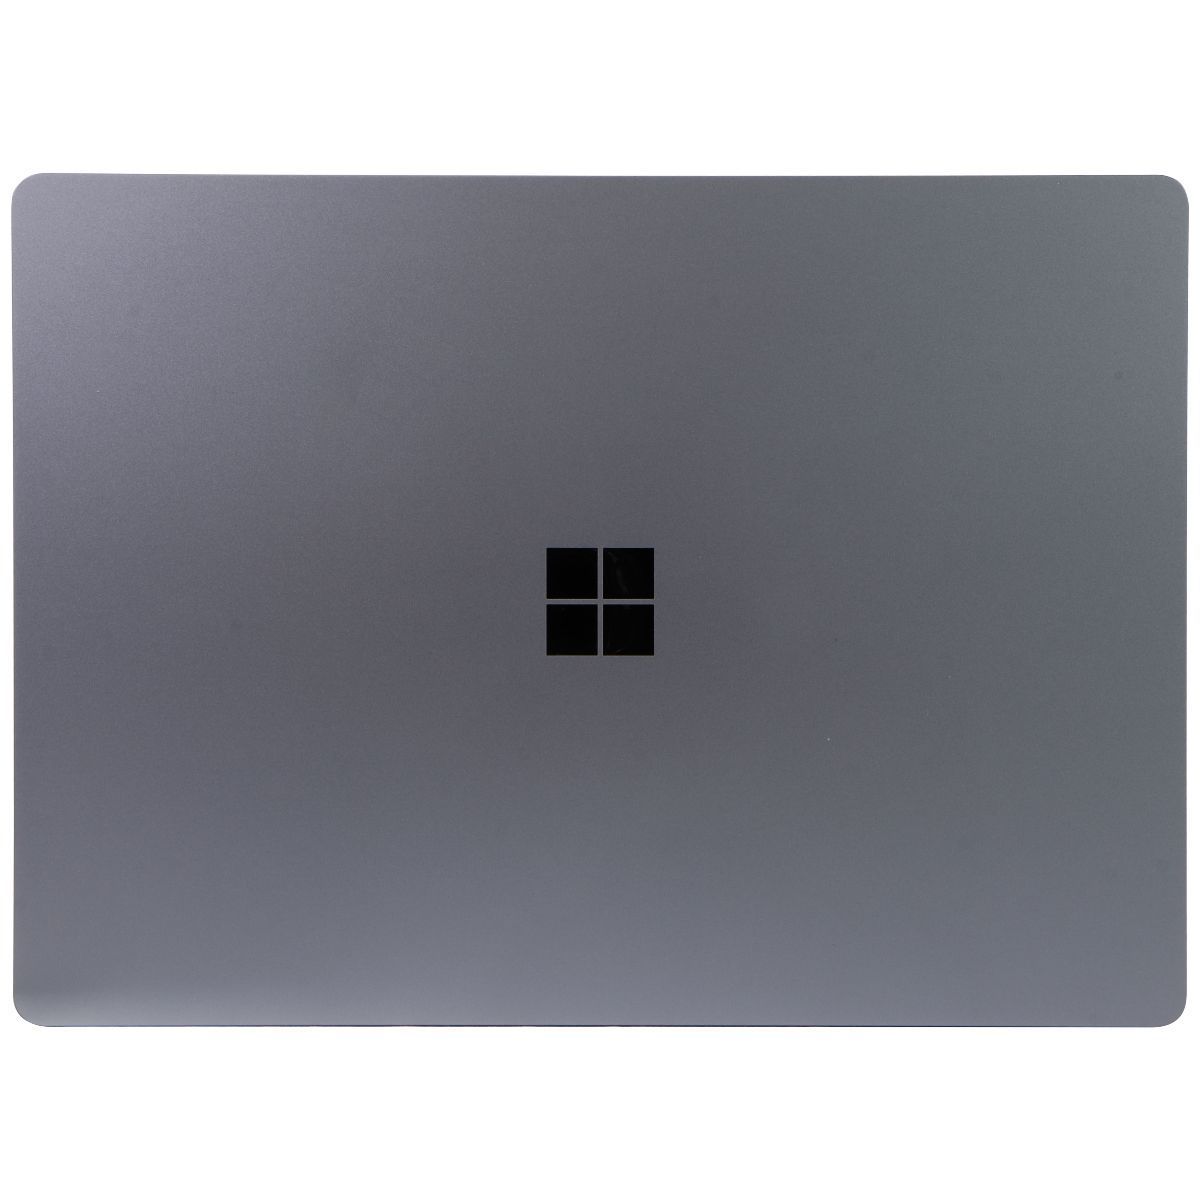 Microsoft Surface Laptop 4 (13.5-in) 1950 i5-1135G7/512GB SSD/8GB - Ice Blue Laptops - PC Laptops & Netbooks Microsoft    - Simple Cell Bulk Wholesale Pricing - USA Seller